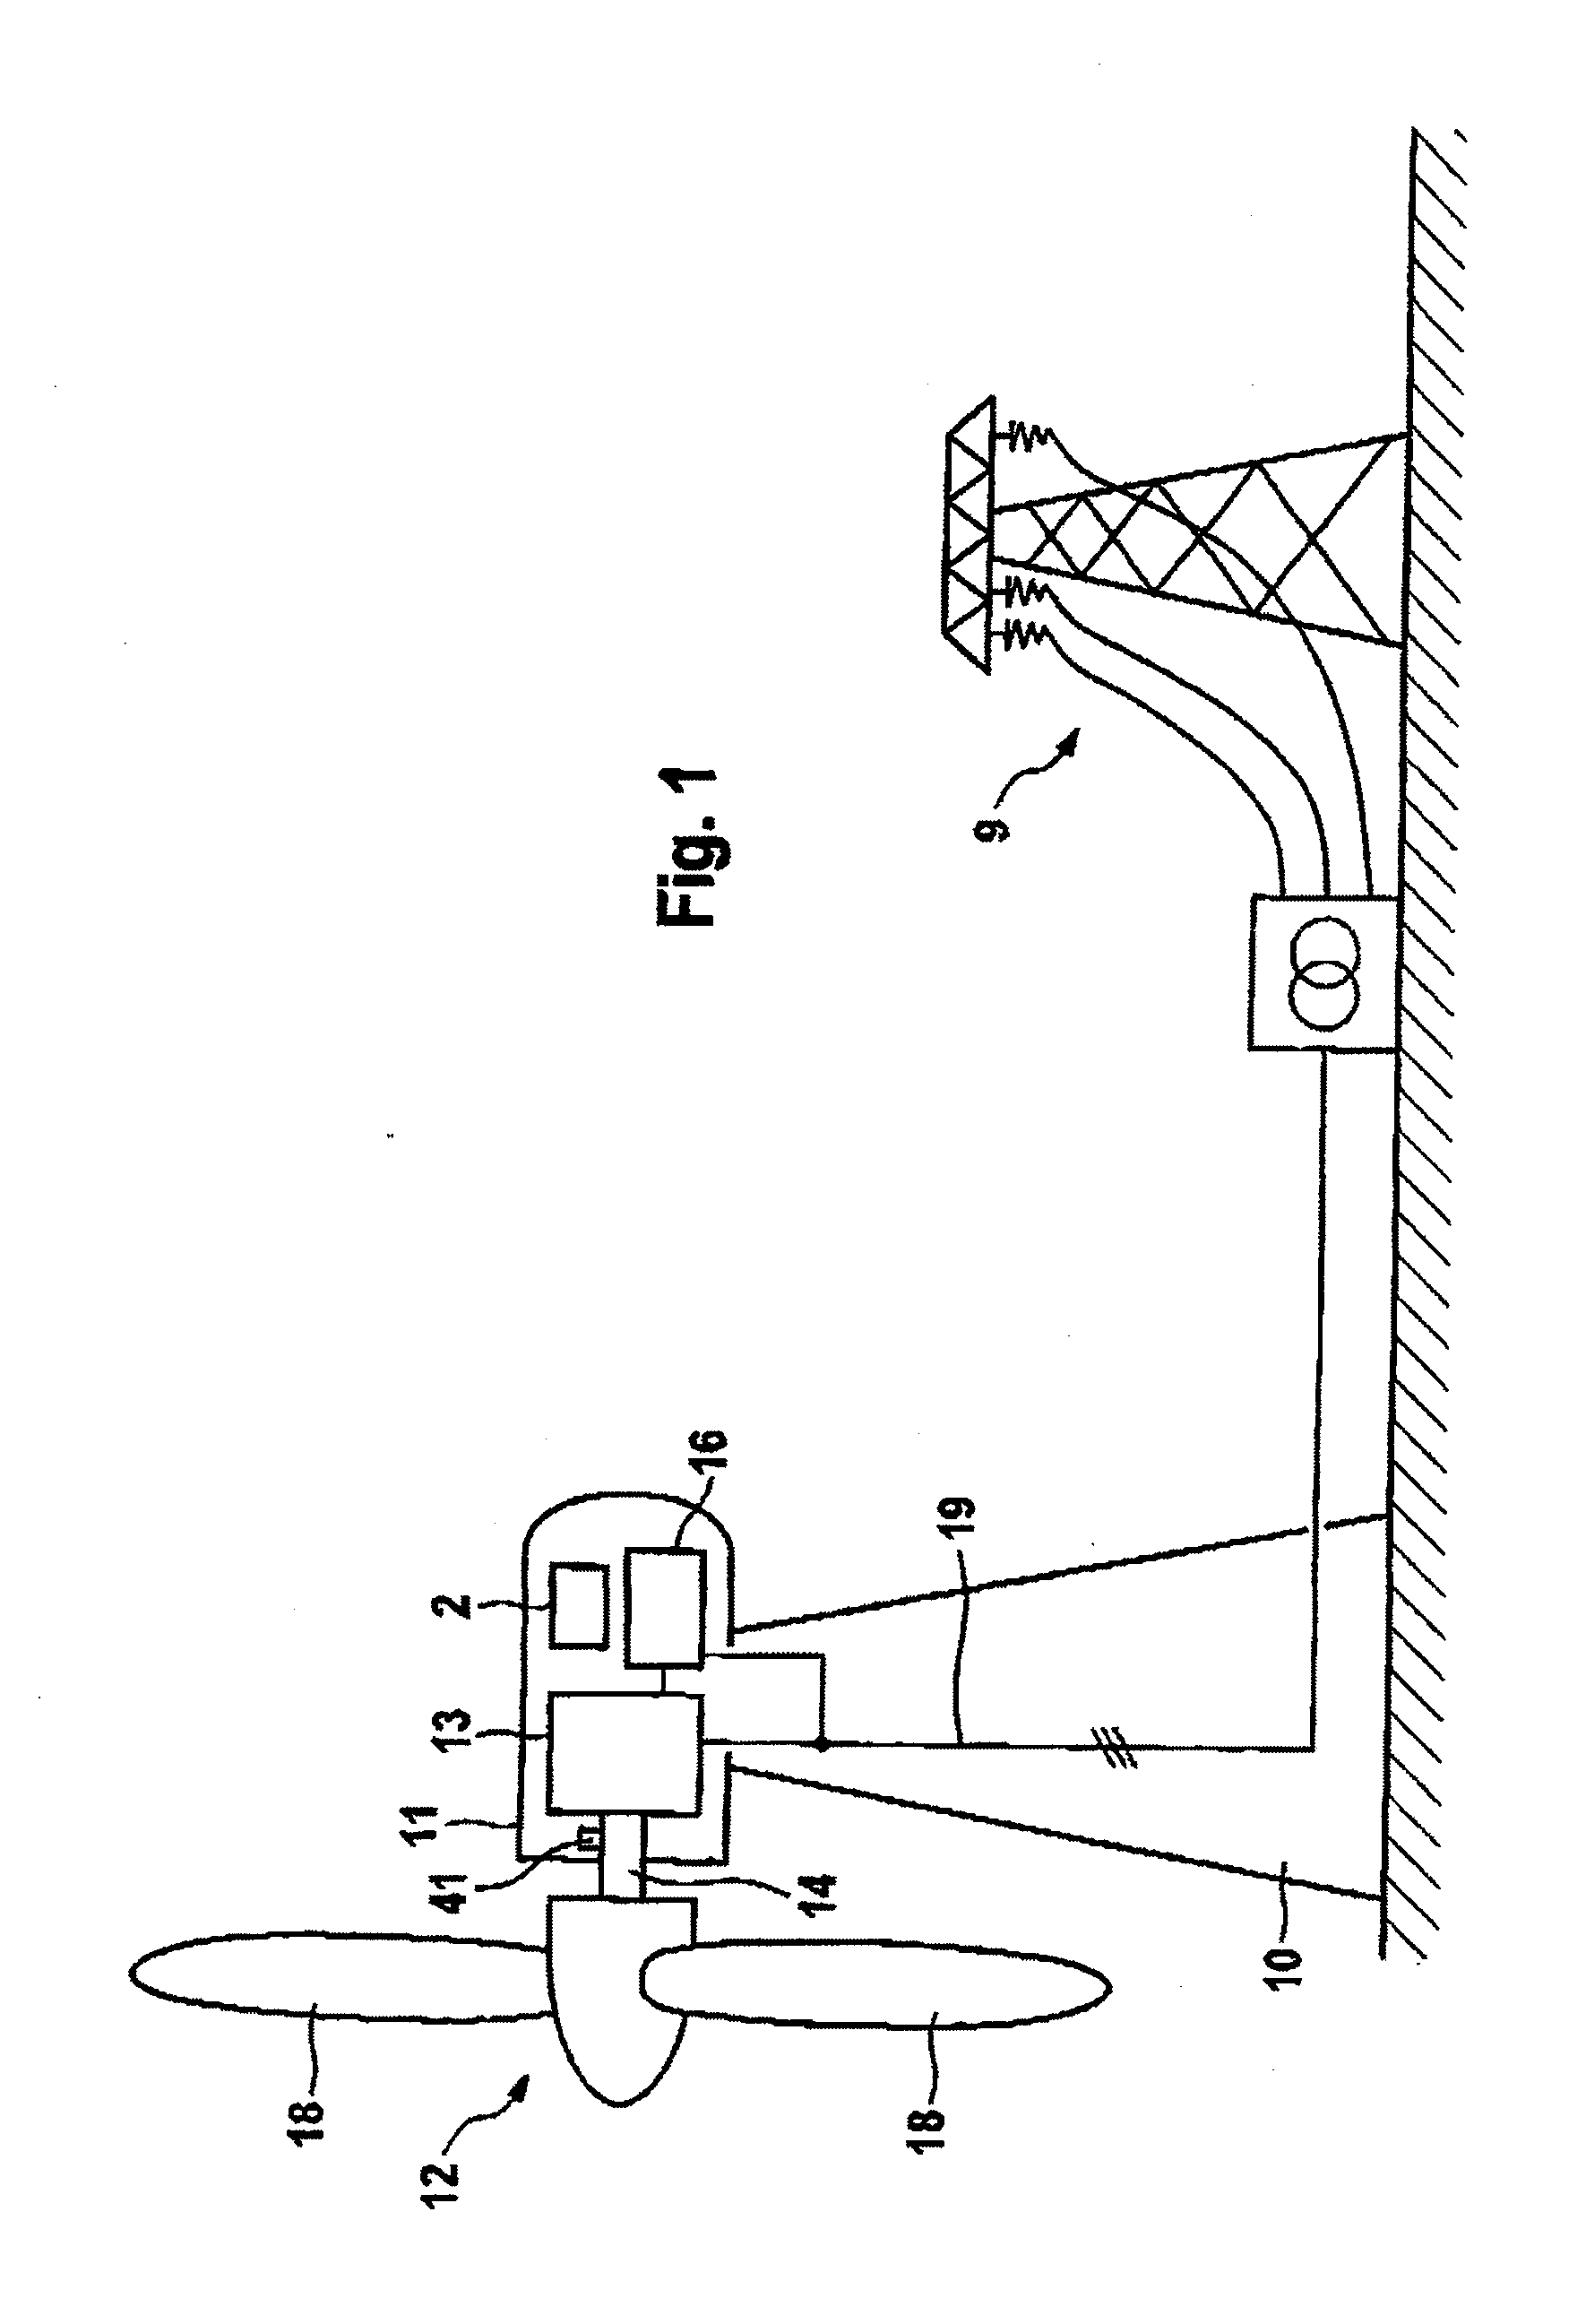 Control device for wind power systems having power failure detection